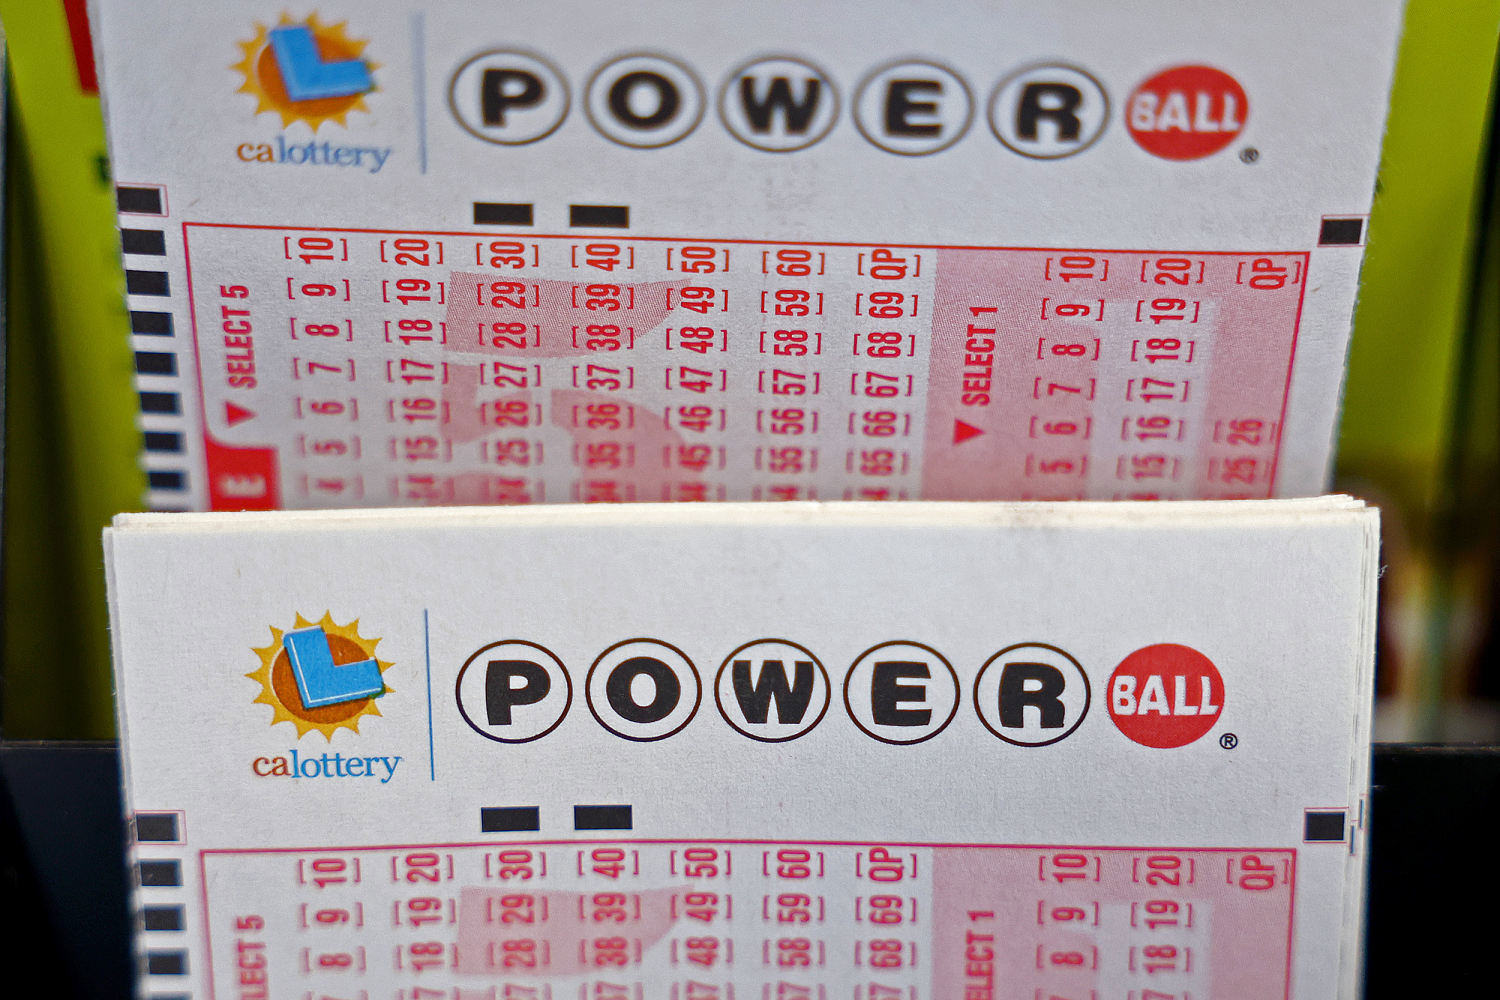 Powerballs Jackpot Grows To 810 Million After Drawing Results In No Winners